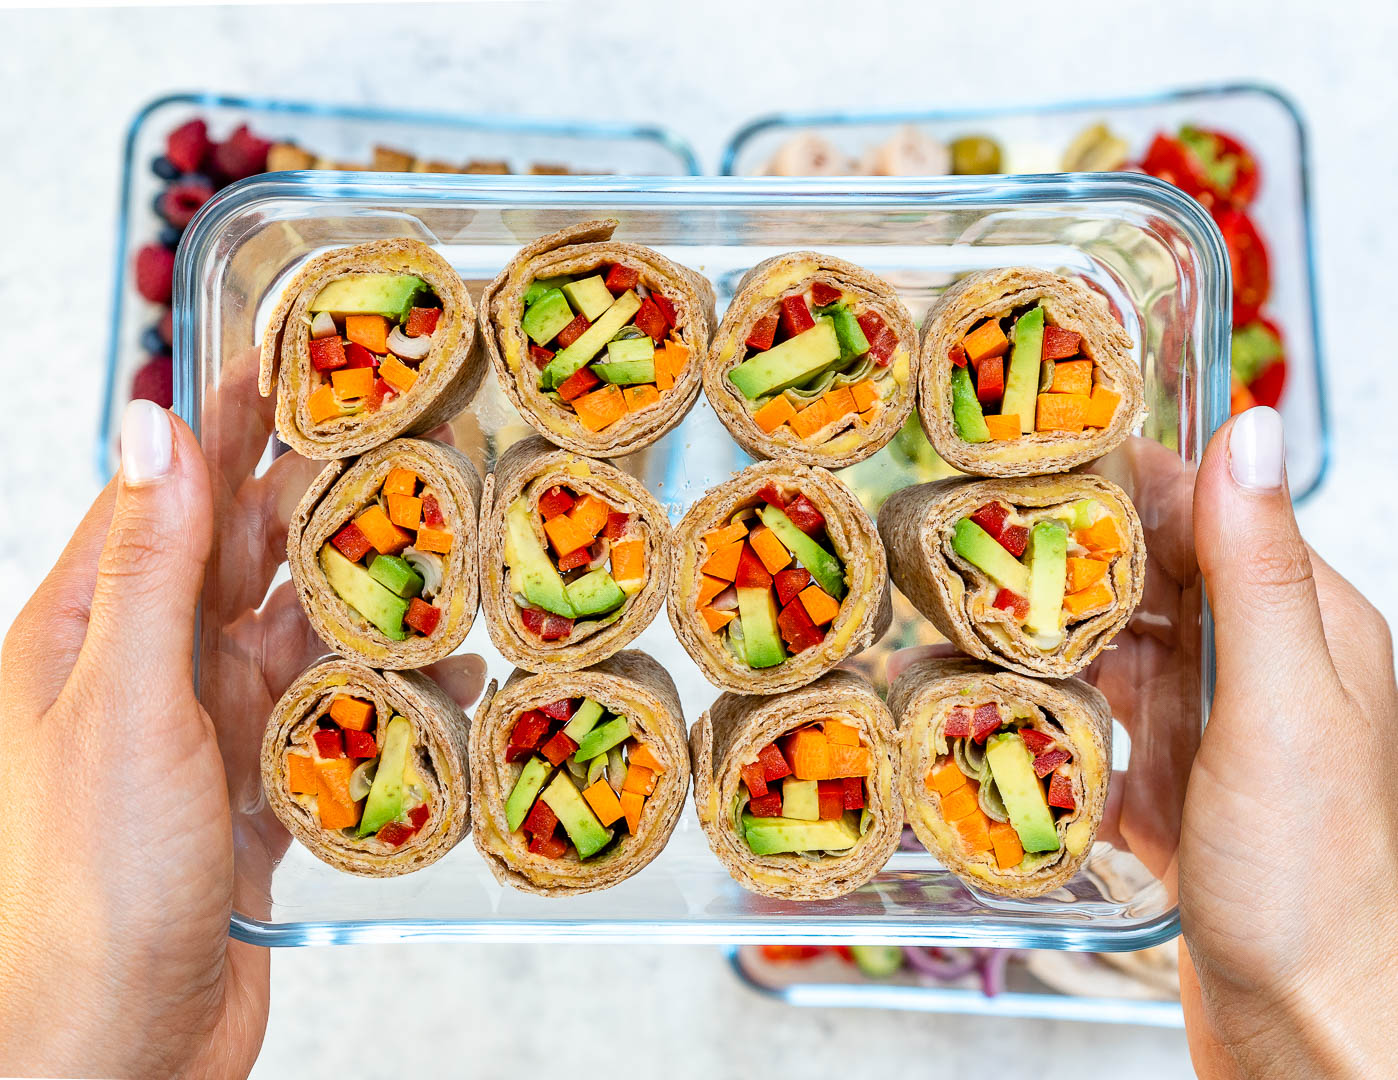 Healthy Lunch Boxes Meal Preparation